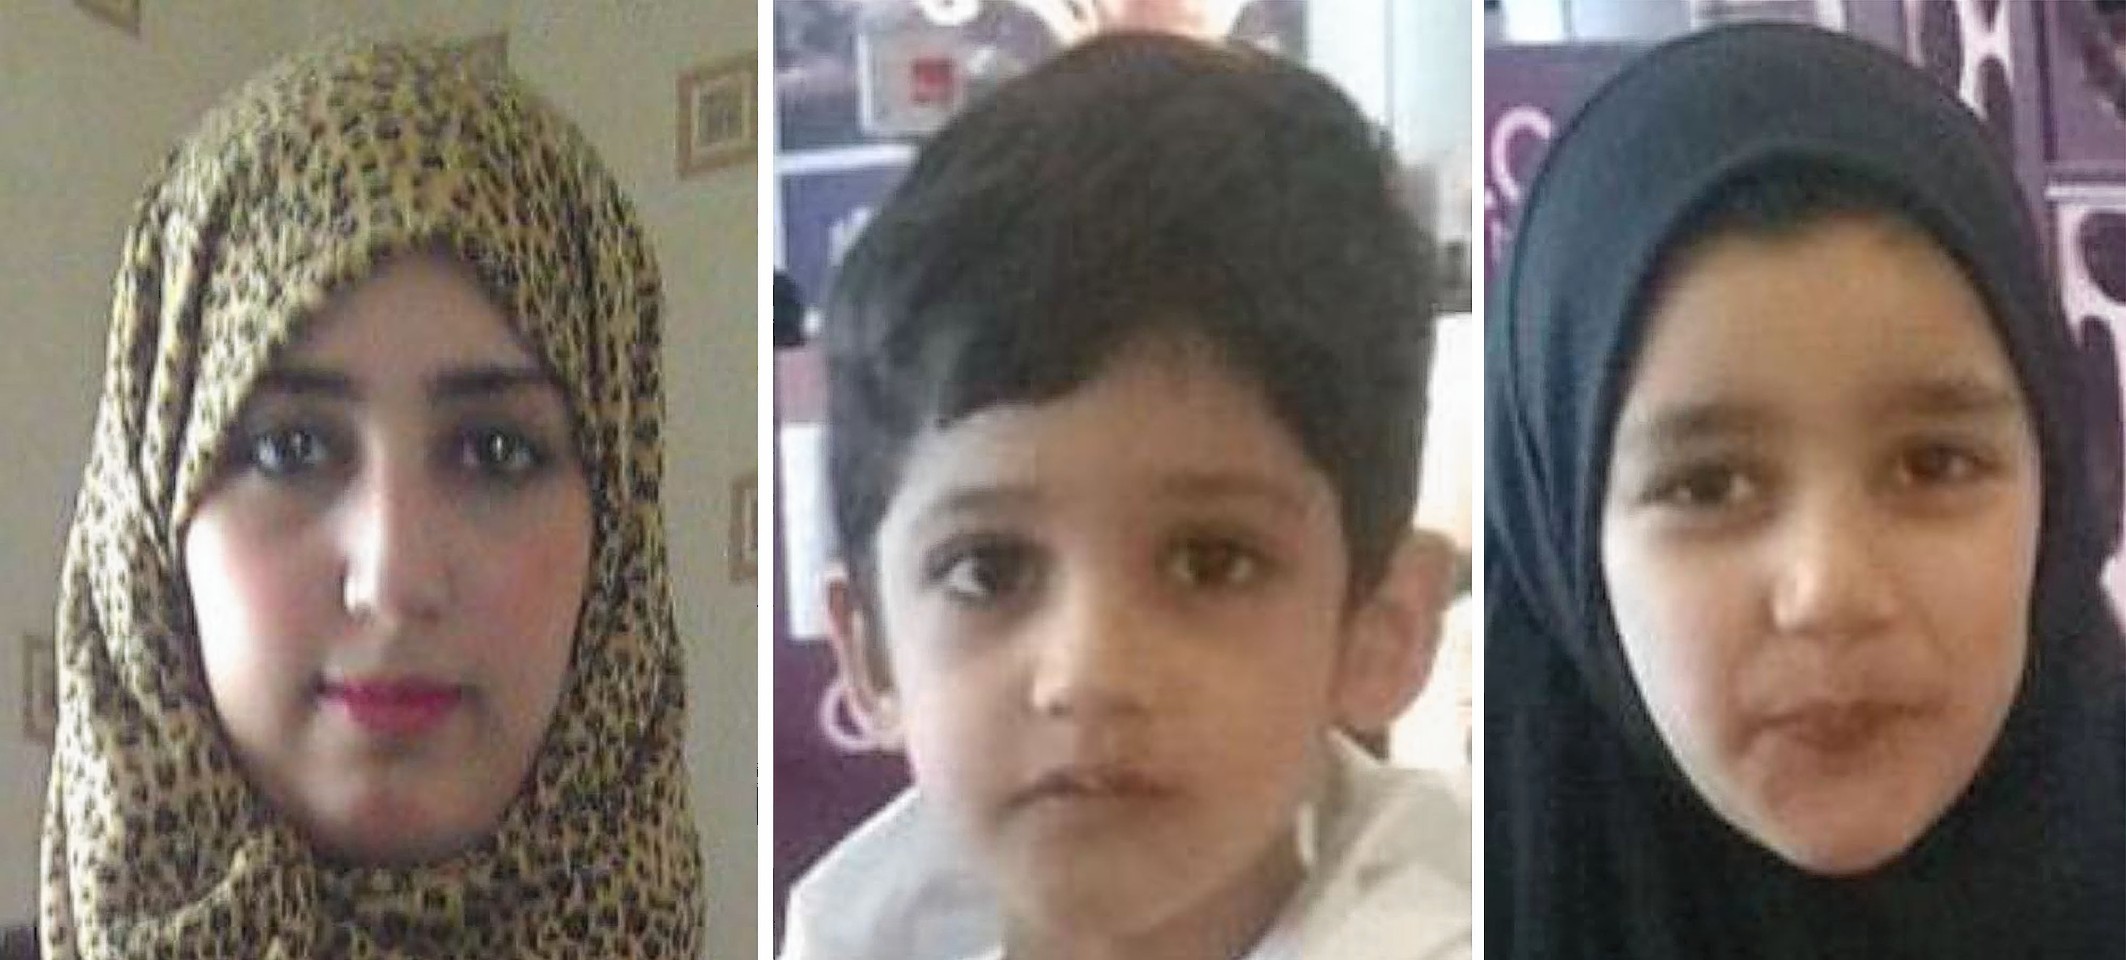 Khadiga Bibi Dawood (left) with her children Muhammad Haseeb (centre) and Maryam Siddiqui (right) who are 12 members of the same family who are feared to have travelled to war-torn Syria